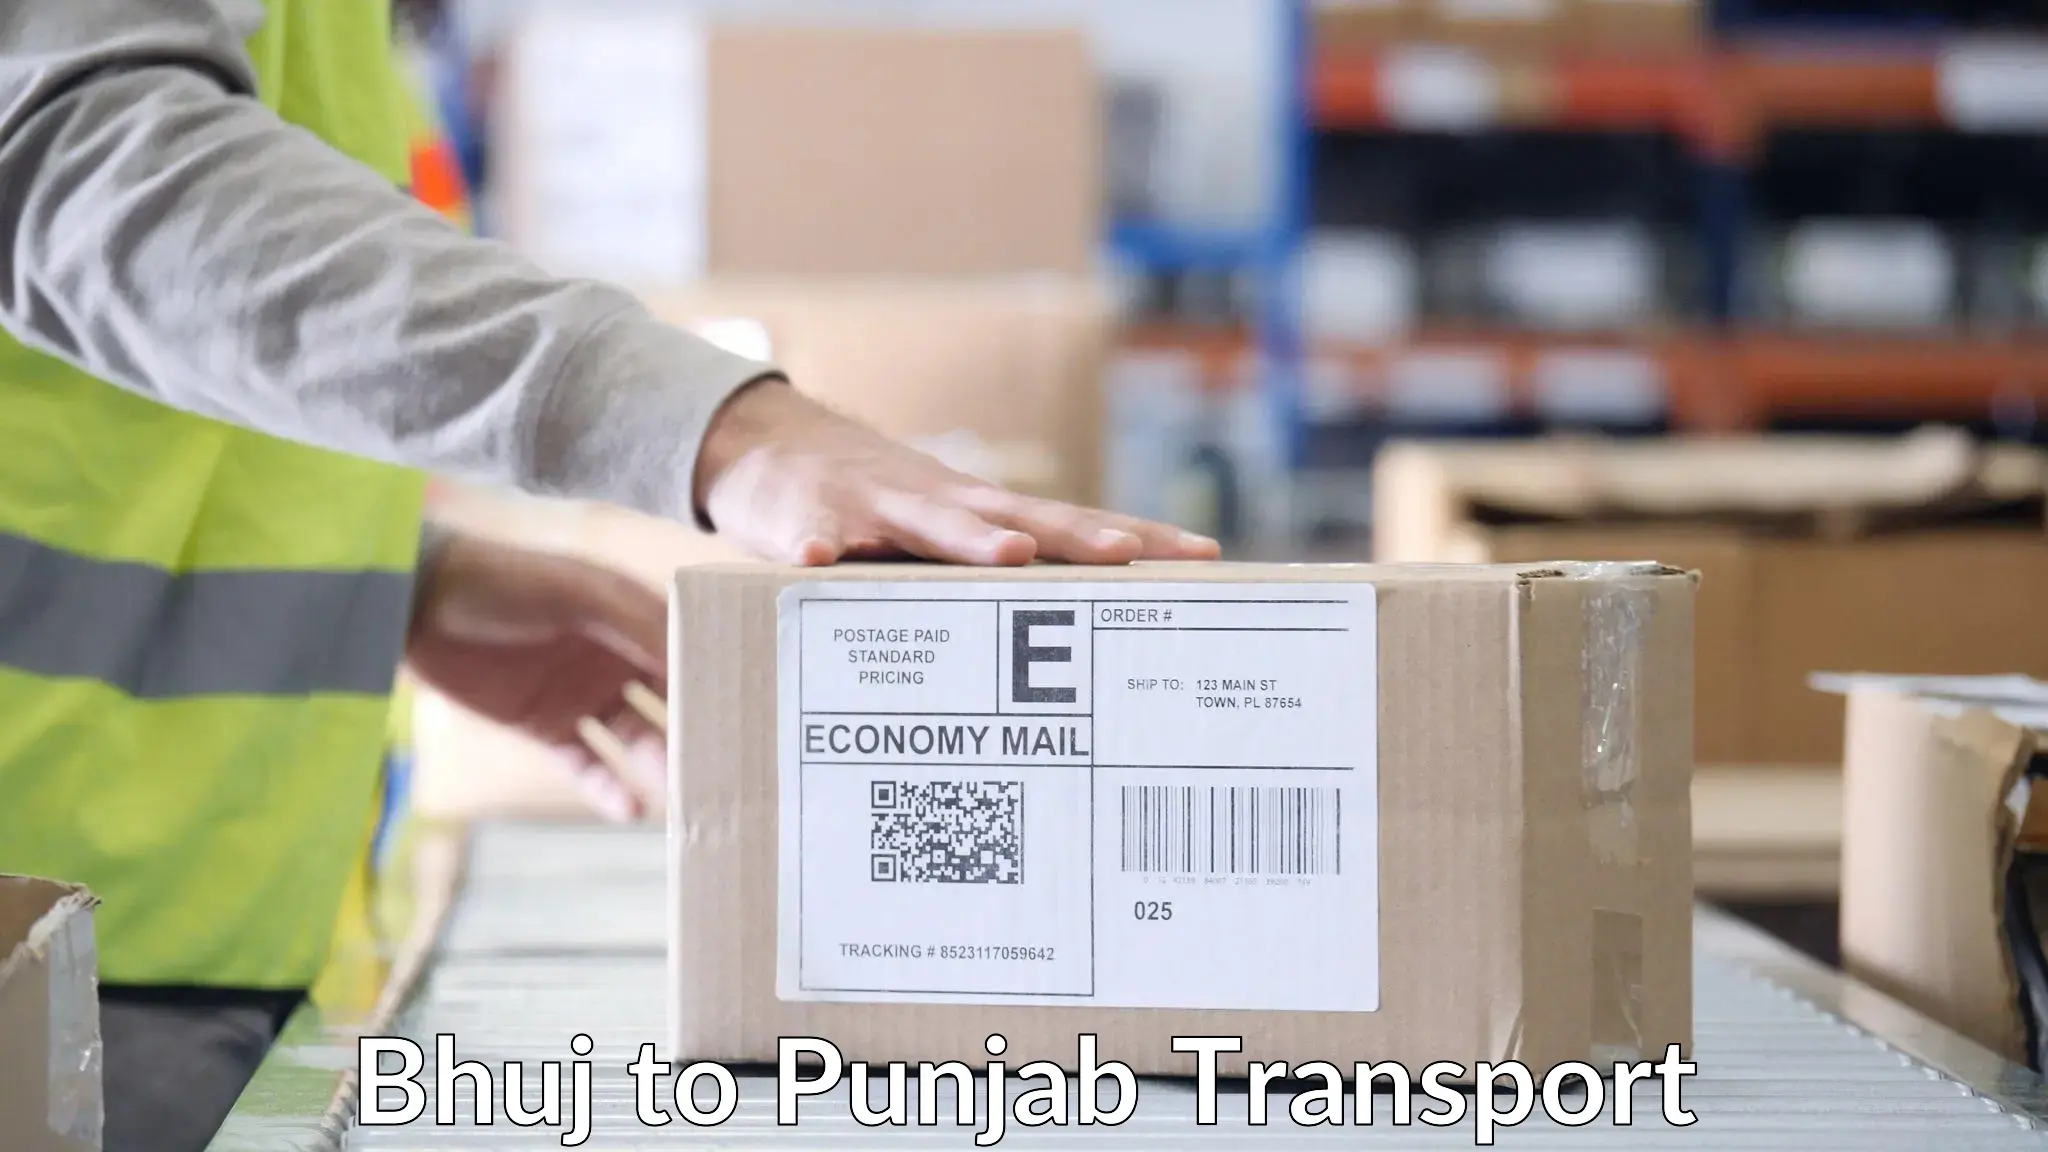 Transport in sharing Bhuj to Patiala